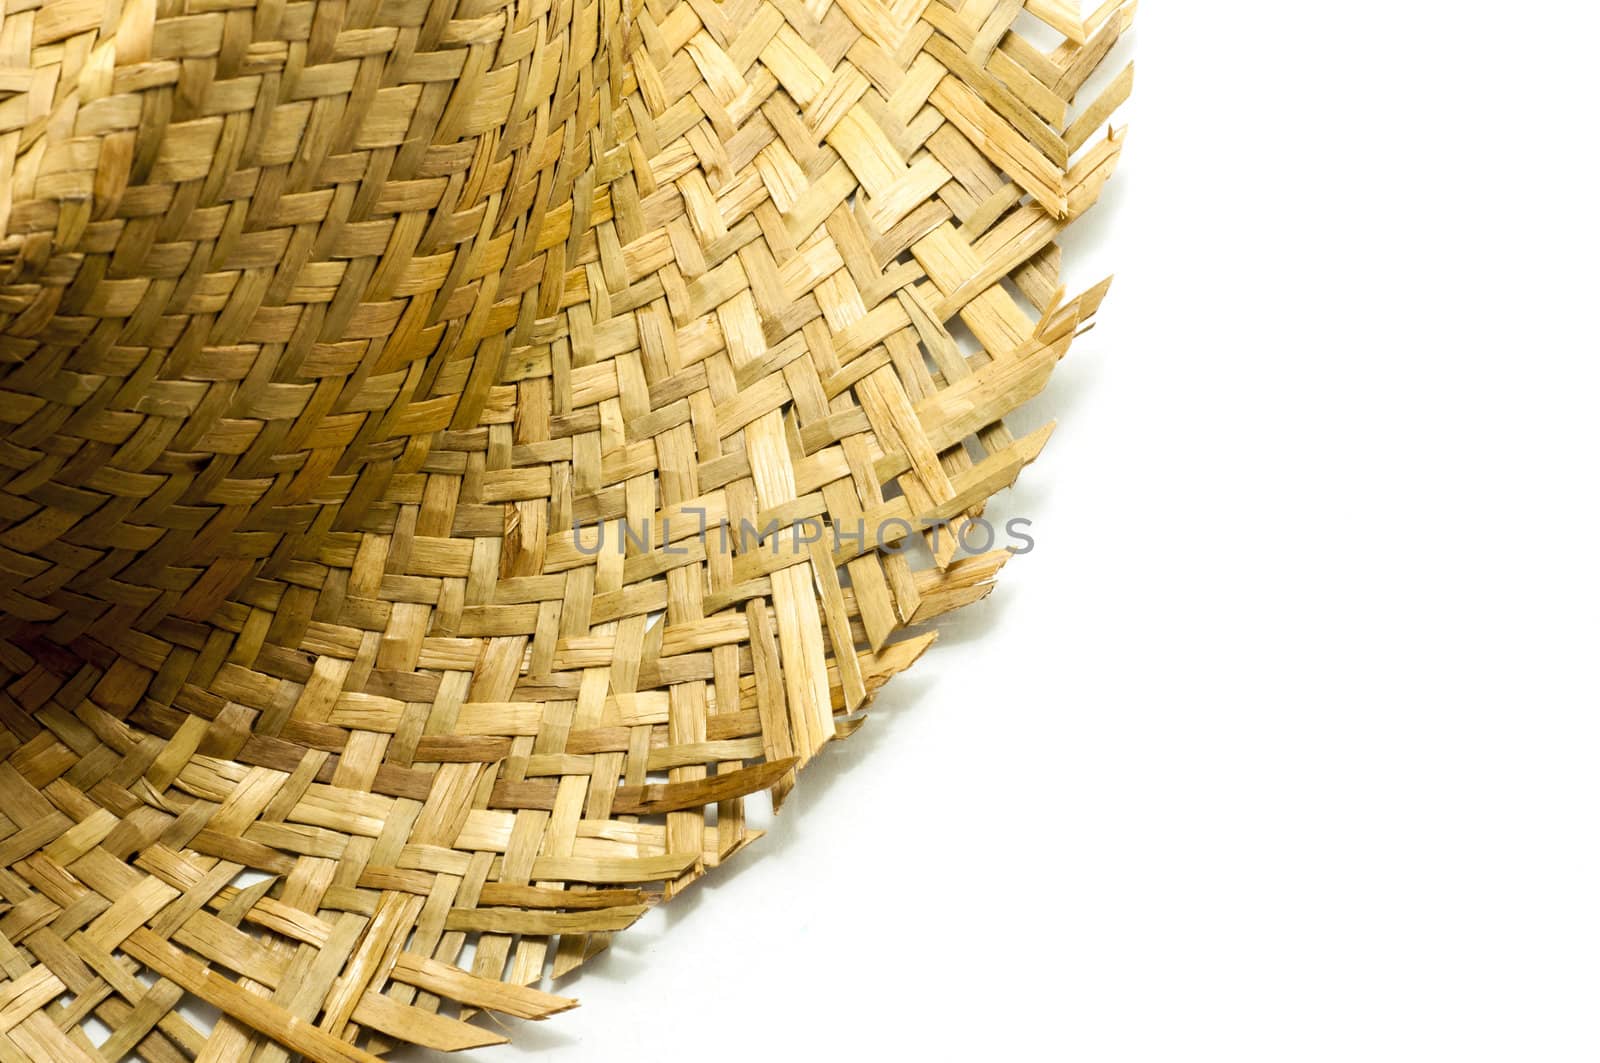 Part of straw hat  on a white background by TanawatPontchour